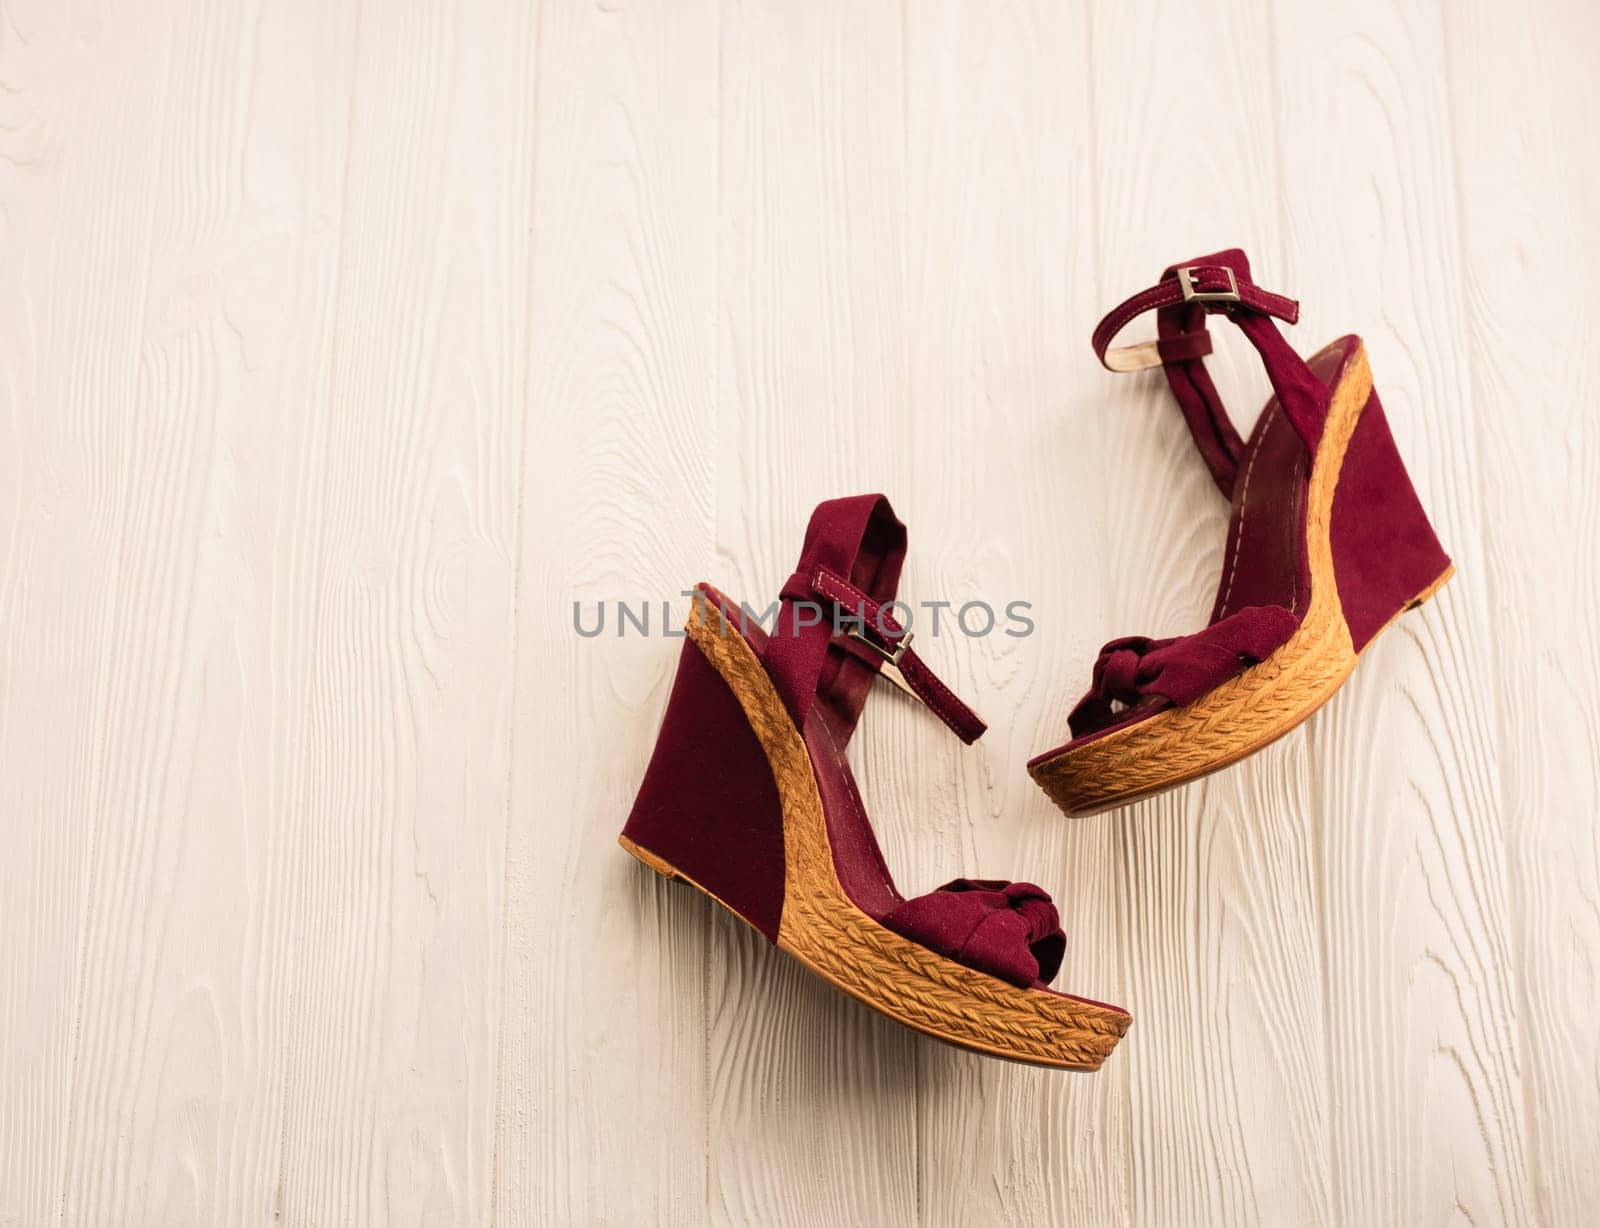 Stylish wedge shoes burgundy footwear clothing. Summer background mockup text. pattern top view above white wooden background. Summer fashion accessories beach. Women summer Vacation top view concept